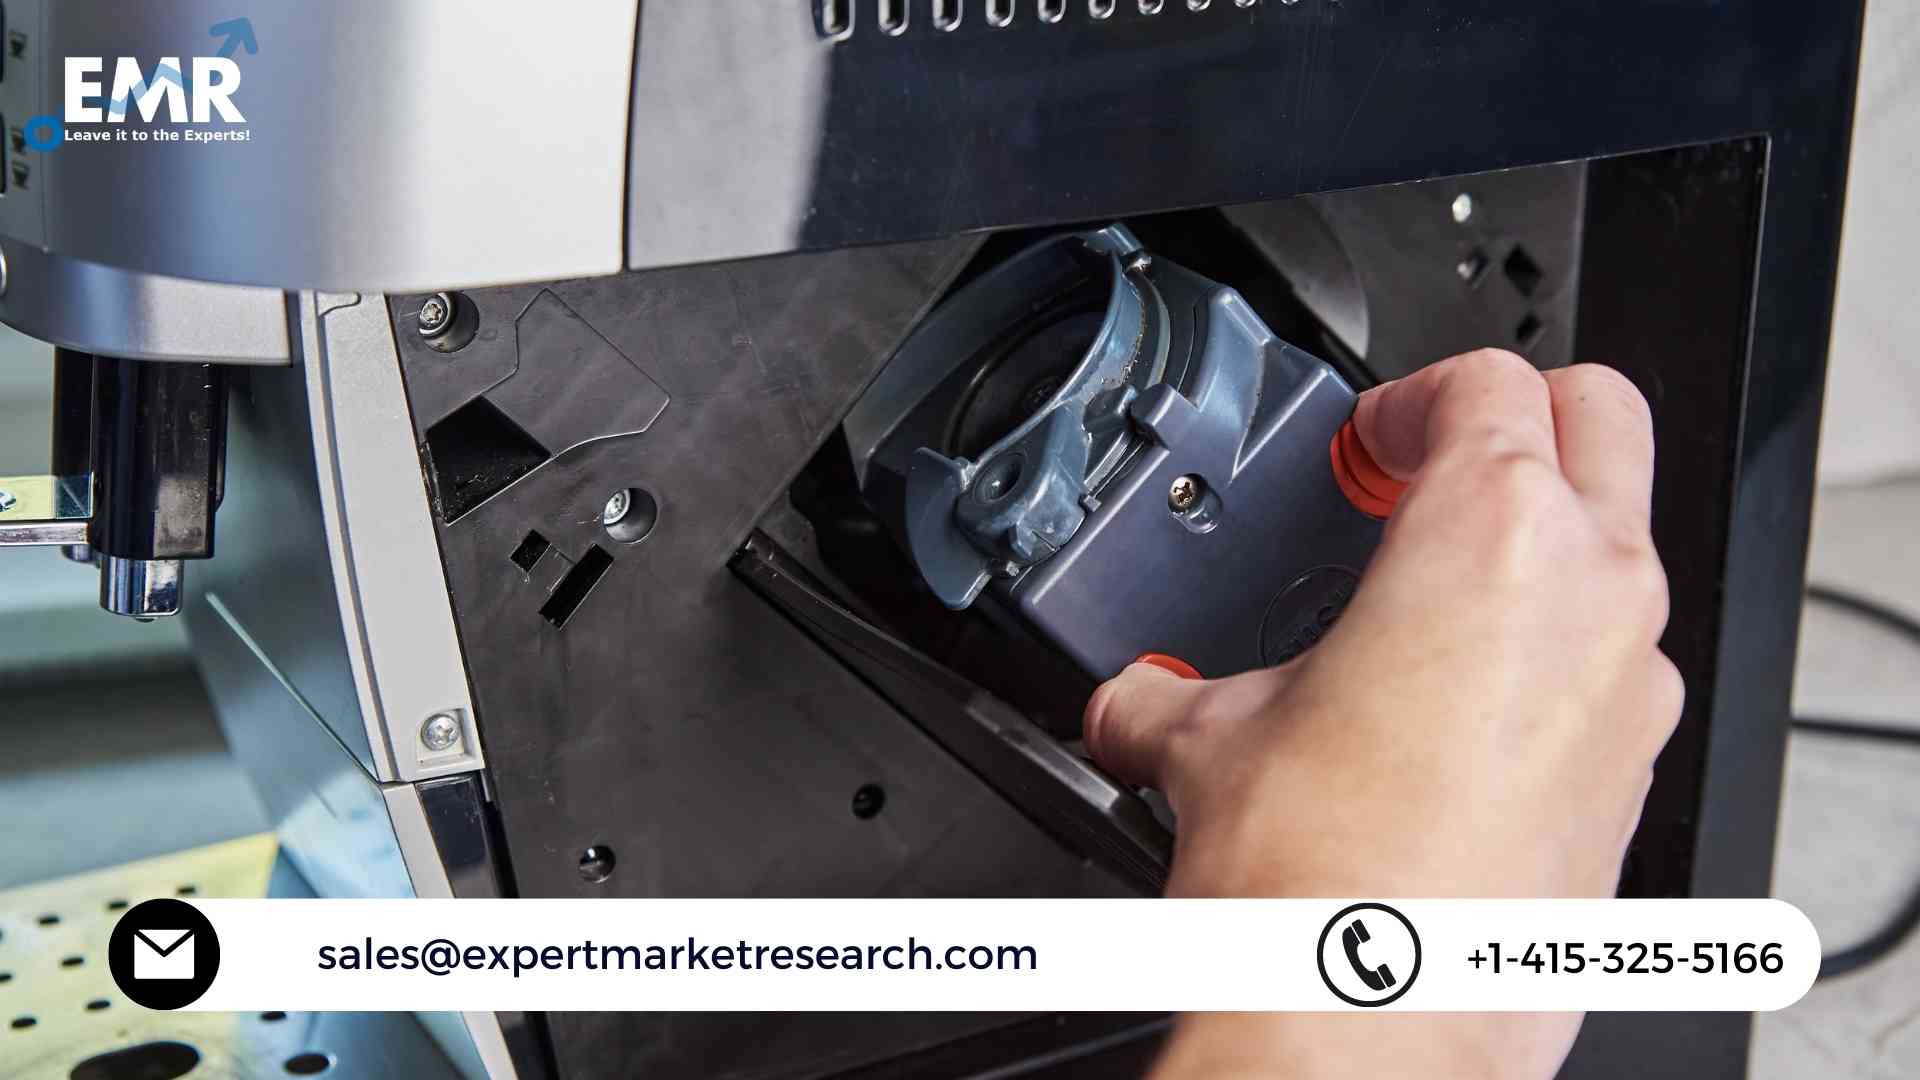 Global Automatic Labelling Machine Market To be Driven by the Need For Efficient And Comprehensive Solutions For Industrial Labelling Tasks In the Forecast Period Of 2023-2028 | EMR Inc.